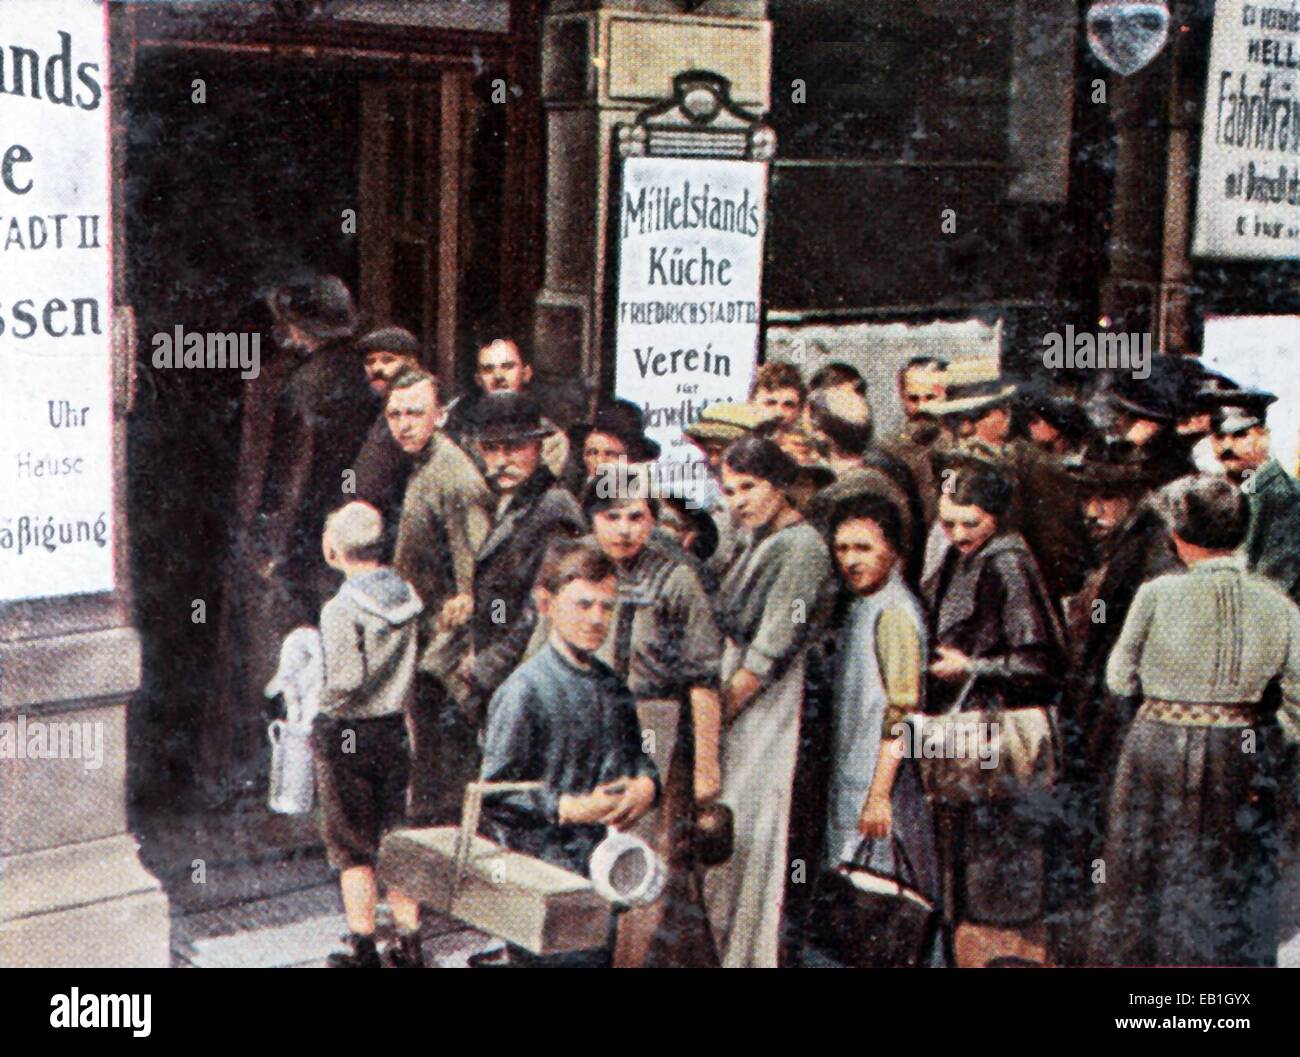 The contemporary colorized German propaganda photo shows men, women and children queueing in front of a food bank for the needy in Berlin-Friedrichstadt around 1915. Photo: Neumann Archive - NO WIRE SERVICE - Stock Photo